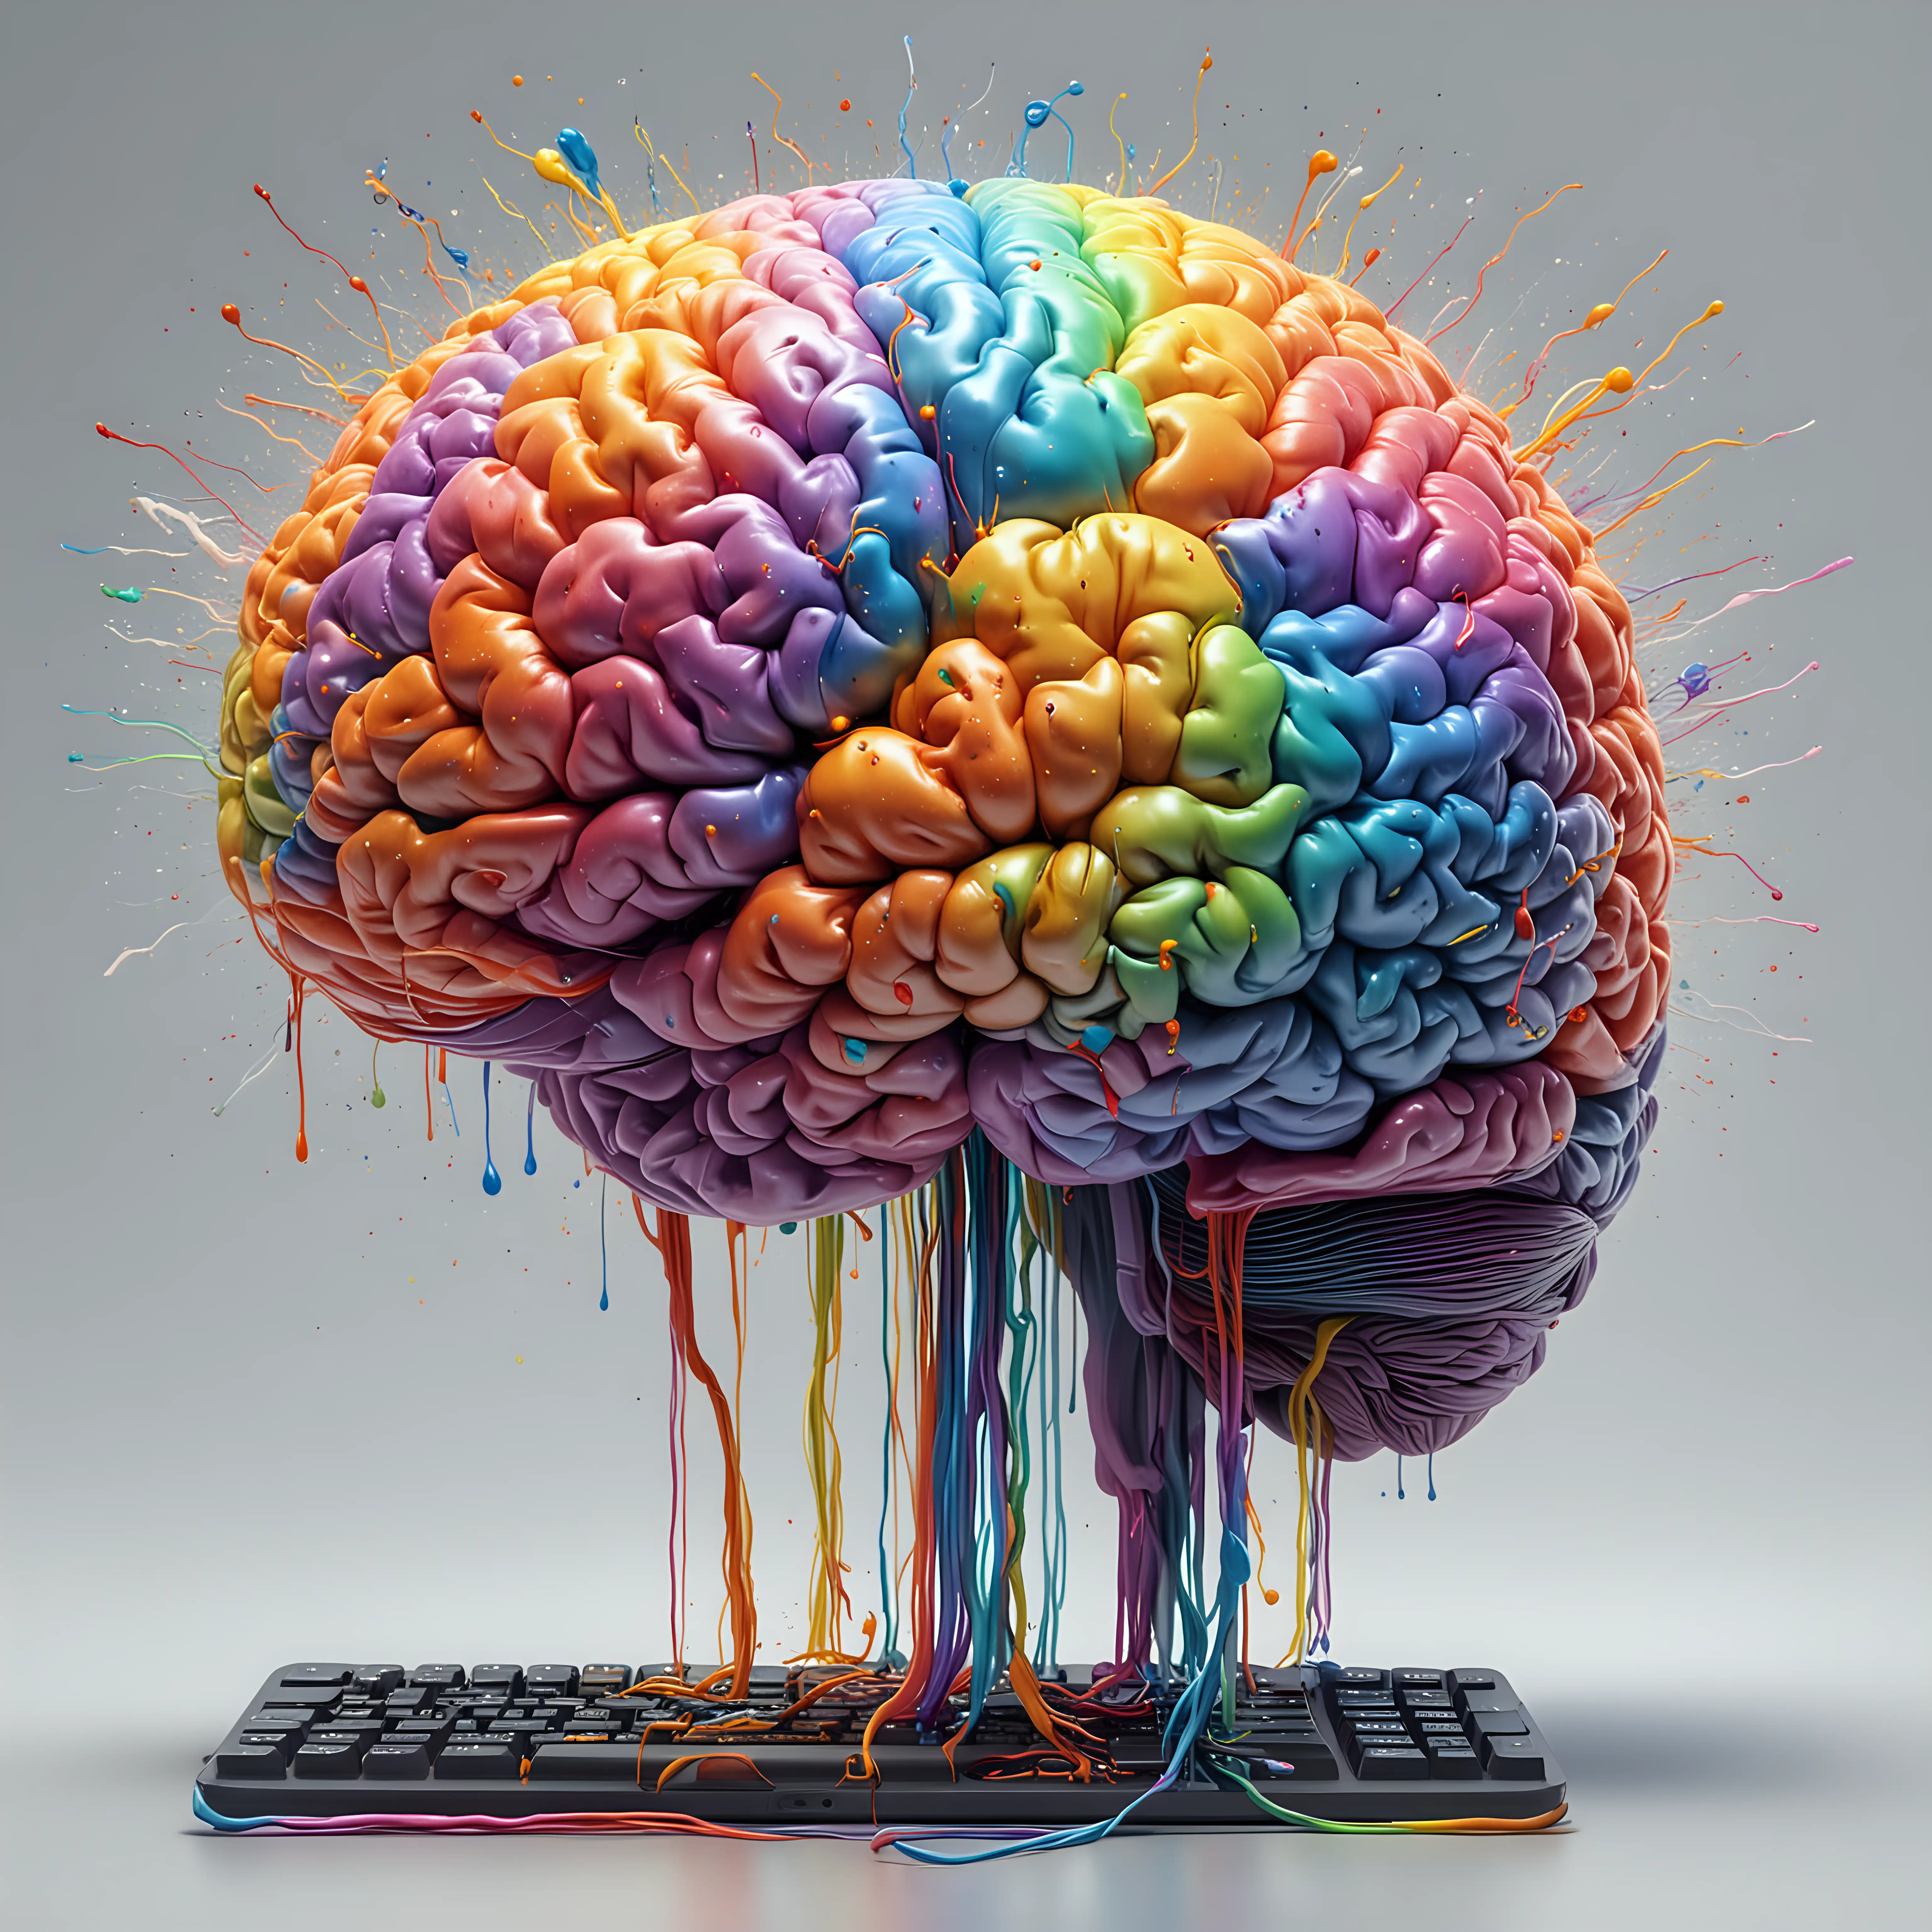 Colorful Brain Connected to Computer Electric Brainstorm Concept Art